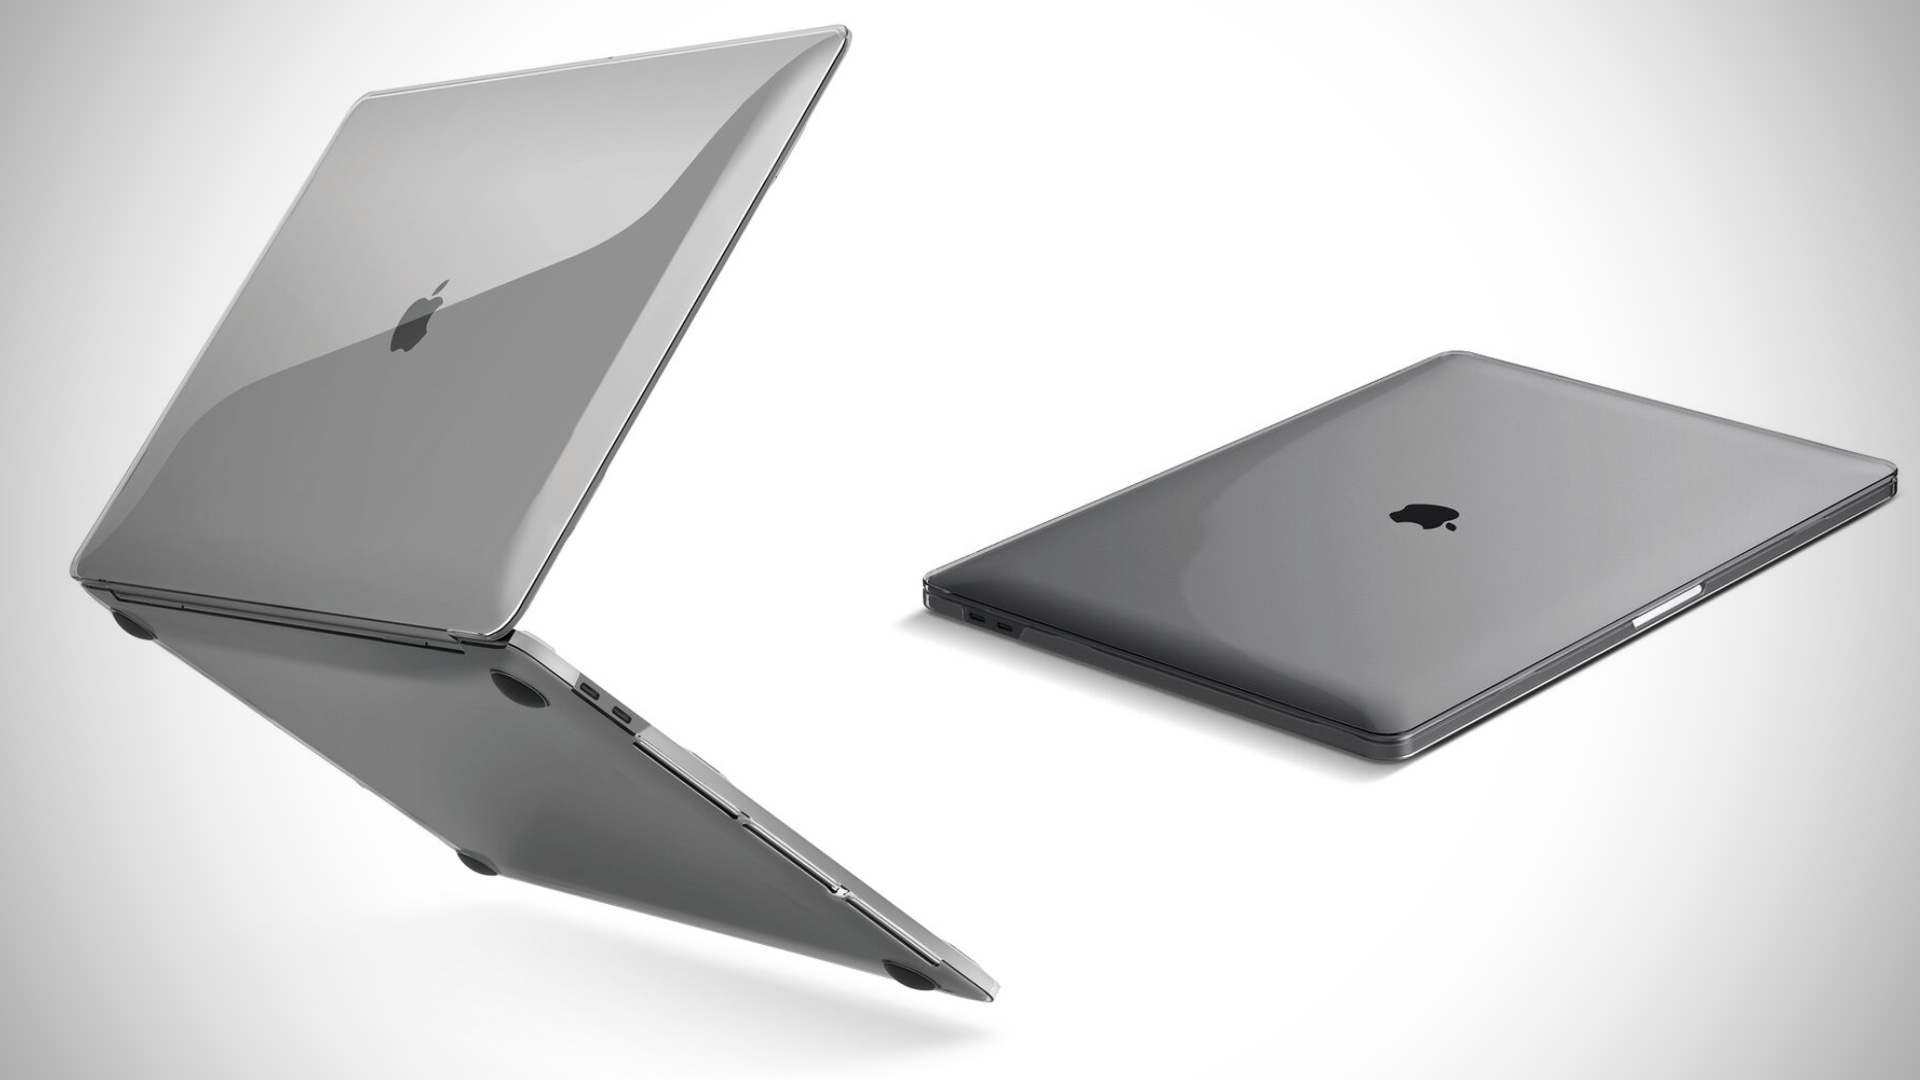 Elago Ultra Slim Hard Case for MacBook provides protection that won't weigh you down